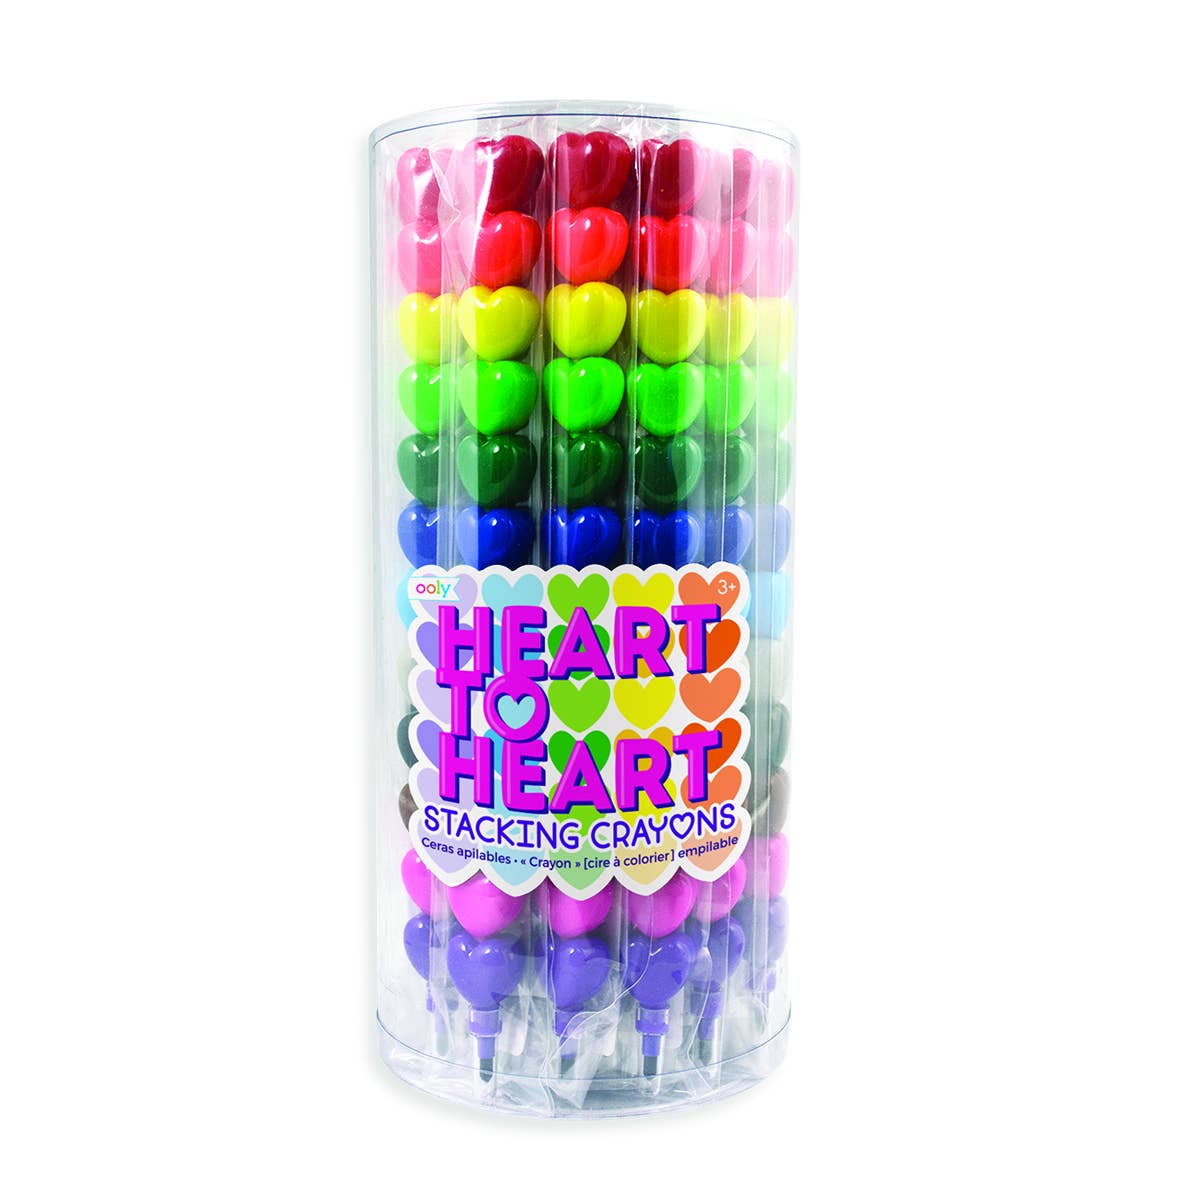 ooly - Heart to Heart Stacking Crayon – Mudpuddles Toy Store